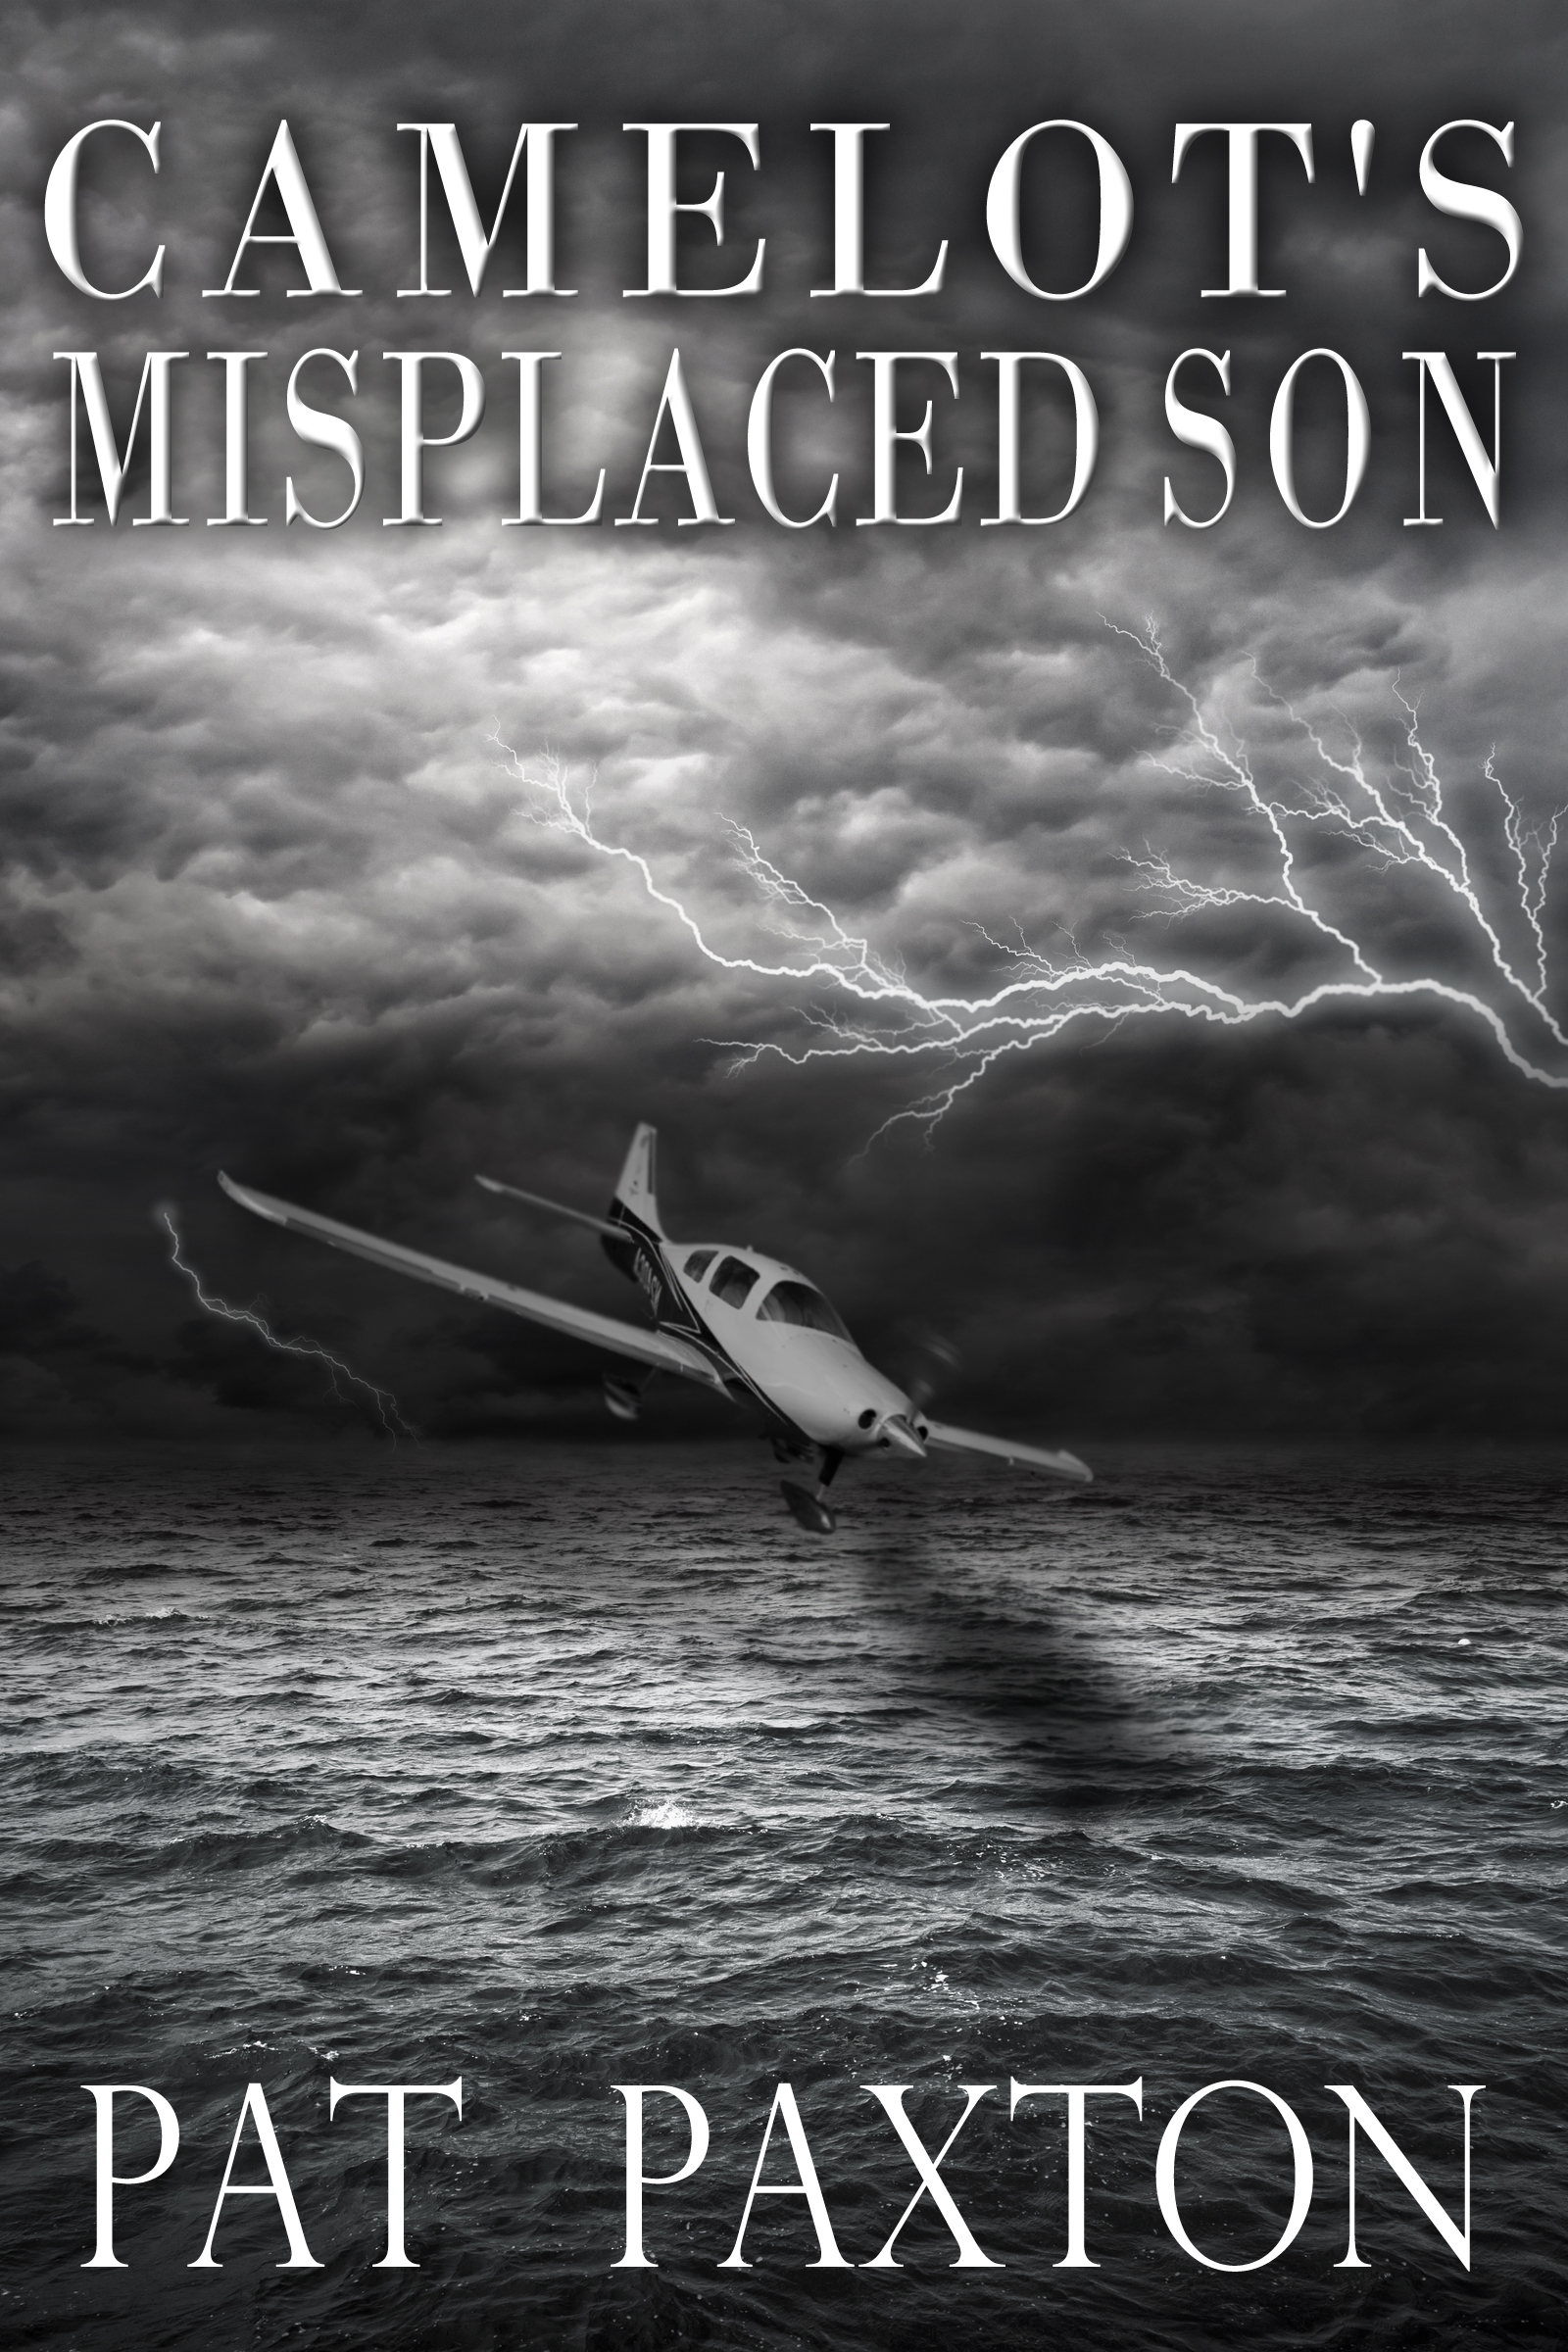 Copy of Camelot's Misplaced Son